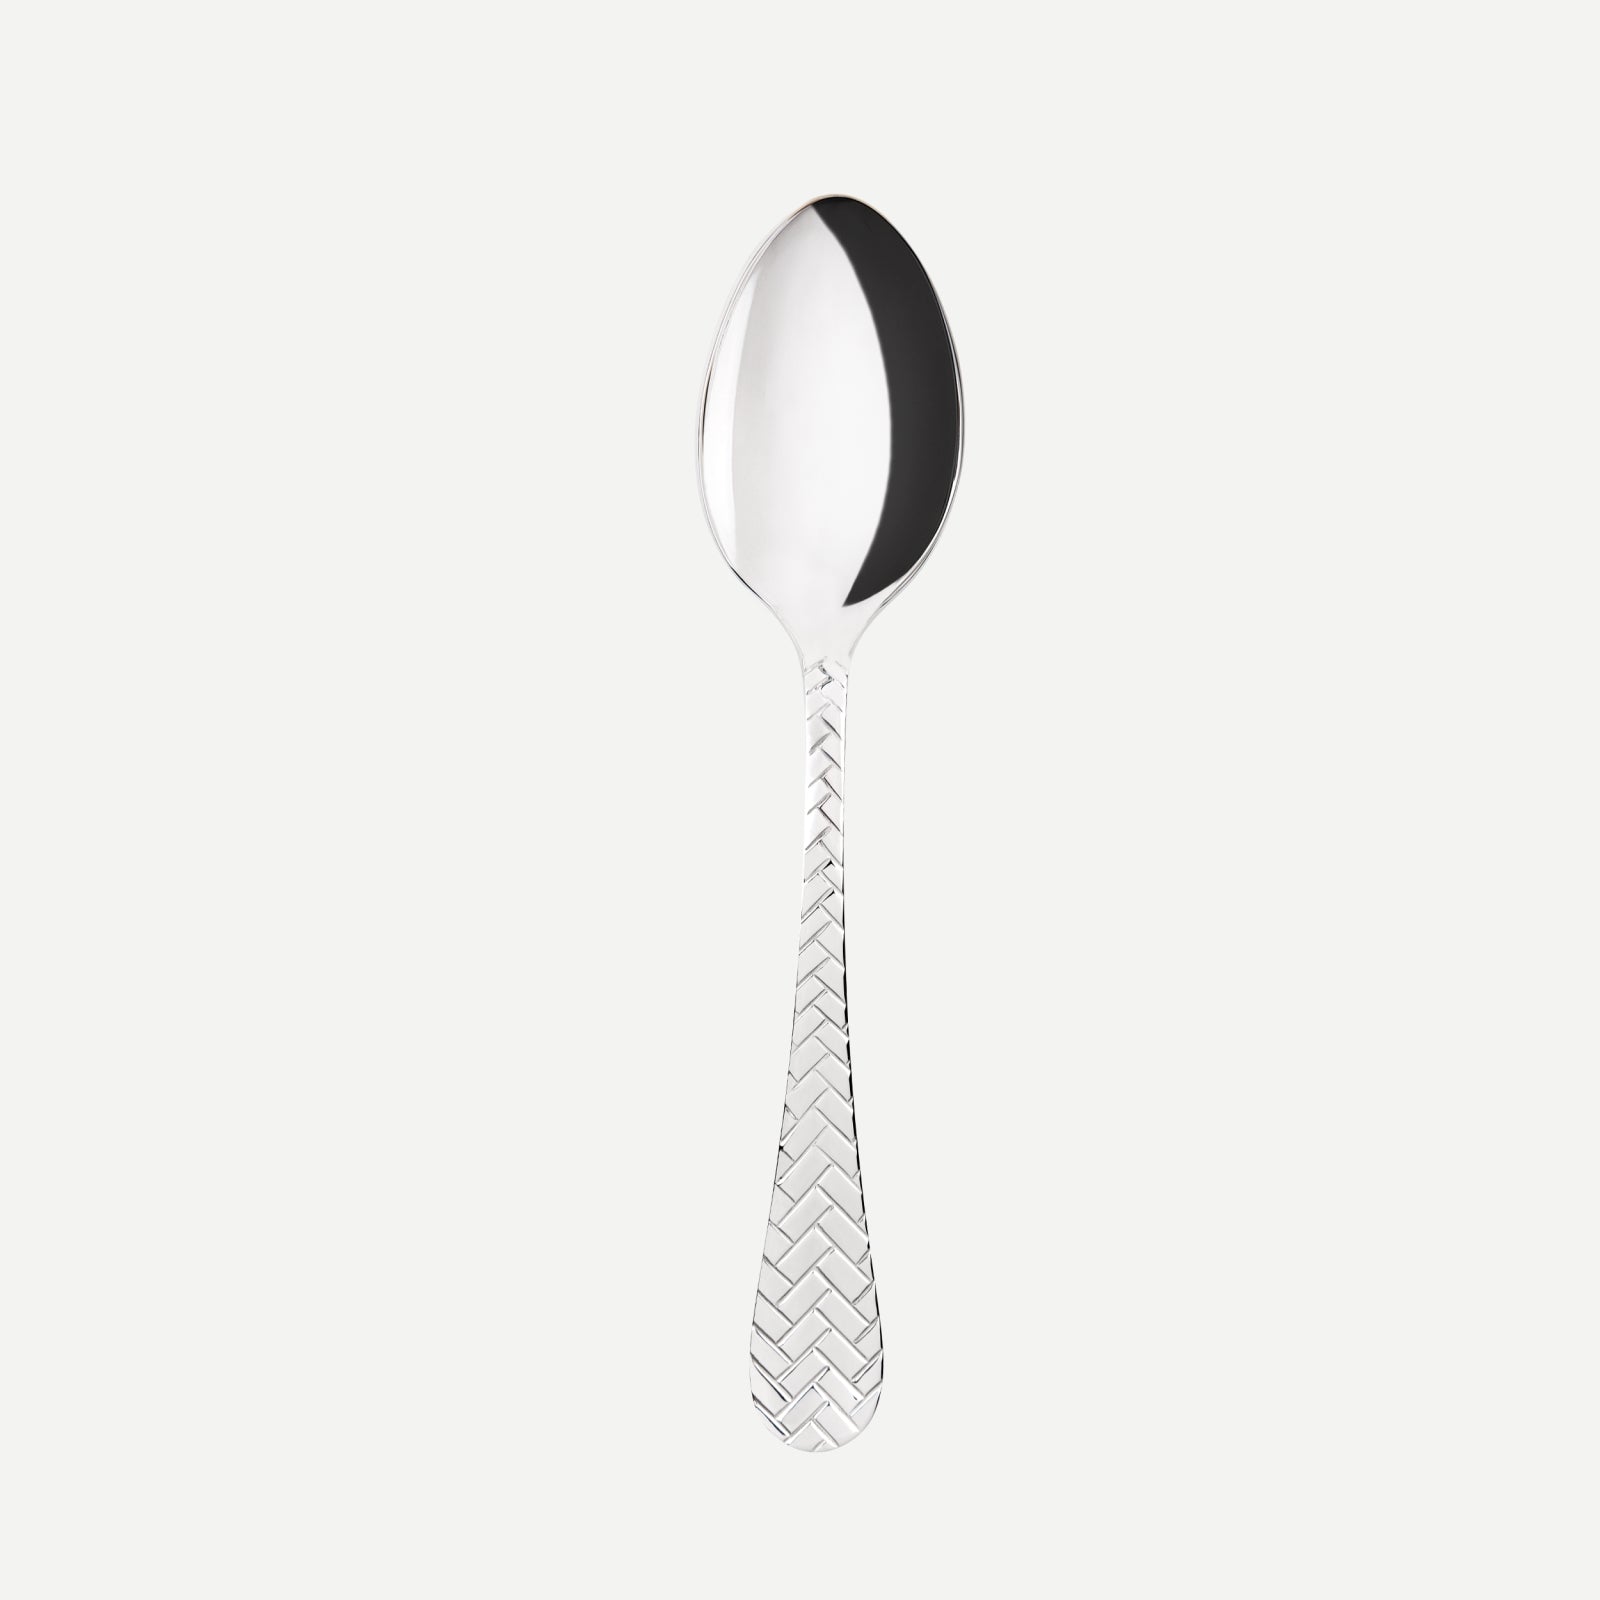 Soup spoon - Nata - Stainless steel